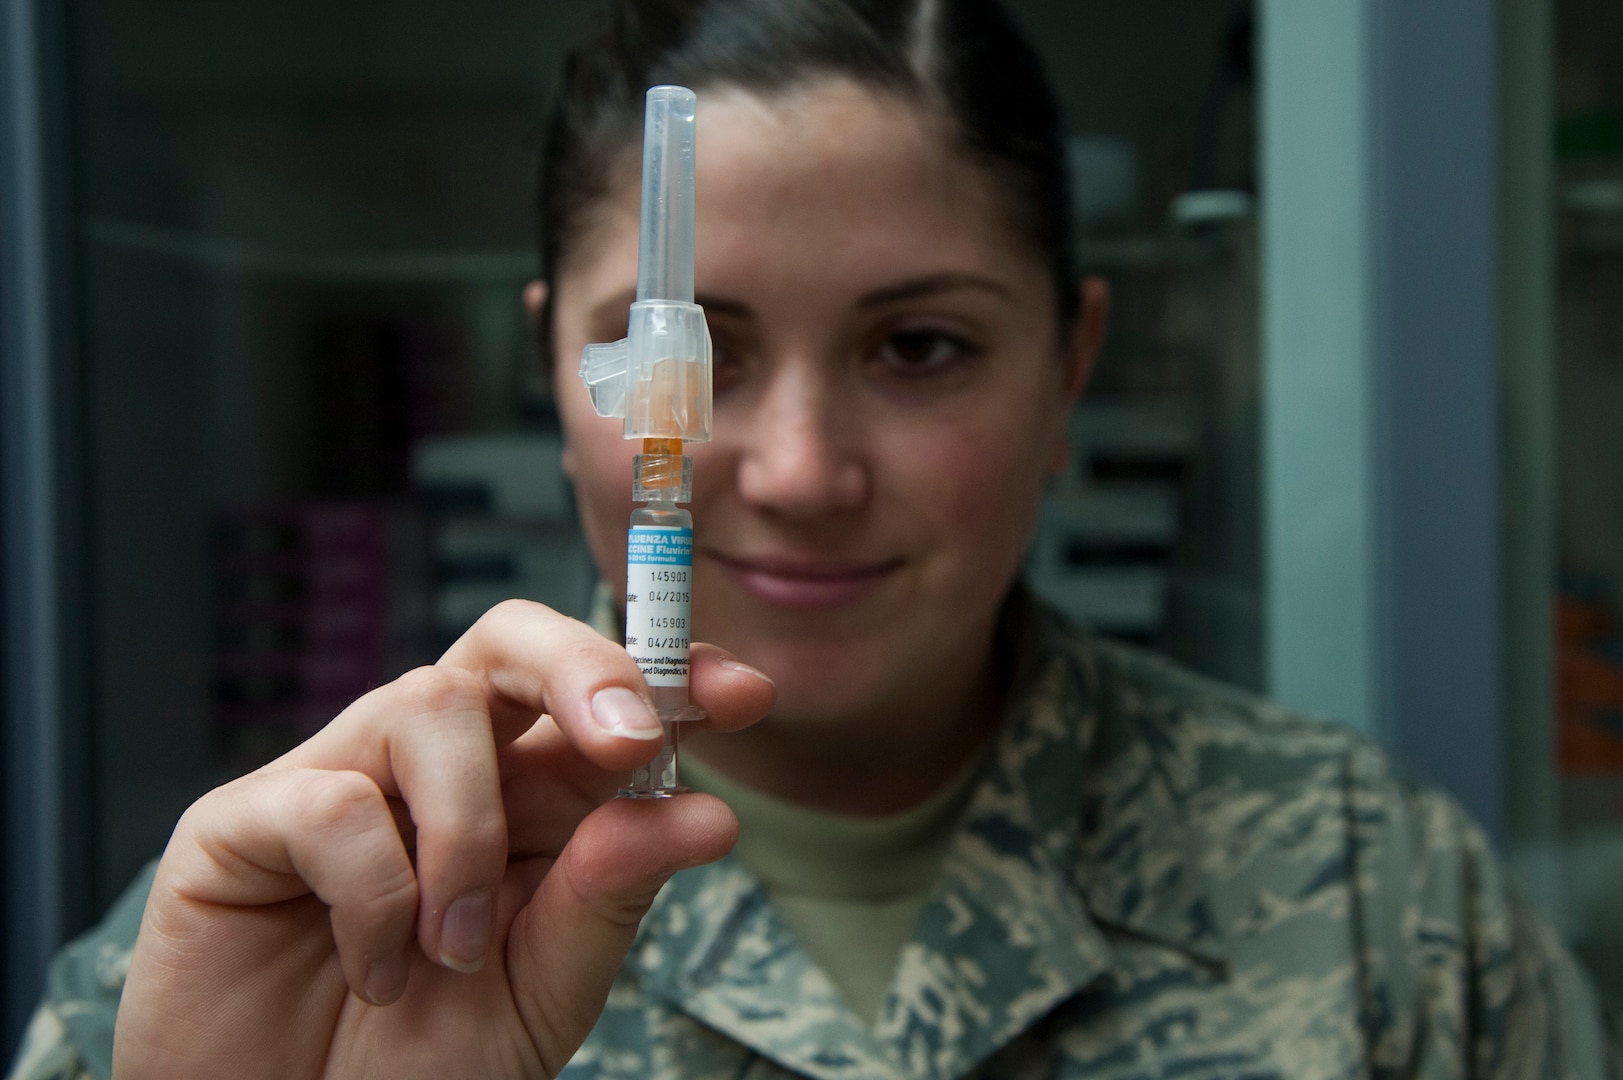 Staff Sgt. Alisha Slone, 359th Medical Group NCO in charge of immunizations, inspects an influenza vaccine Sept. 30, 2014, at the Joint Base San Antonio-Randolph Medical Clinic. The influenza vaccine protects against the main influenza viruses that research suggests will be the most common during that influenza season, according to the Centers for Disease Control and Prevention. (U.S. Air Force photos by Airman 1st Class Stormy Archer/Released)